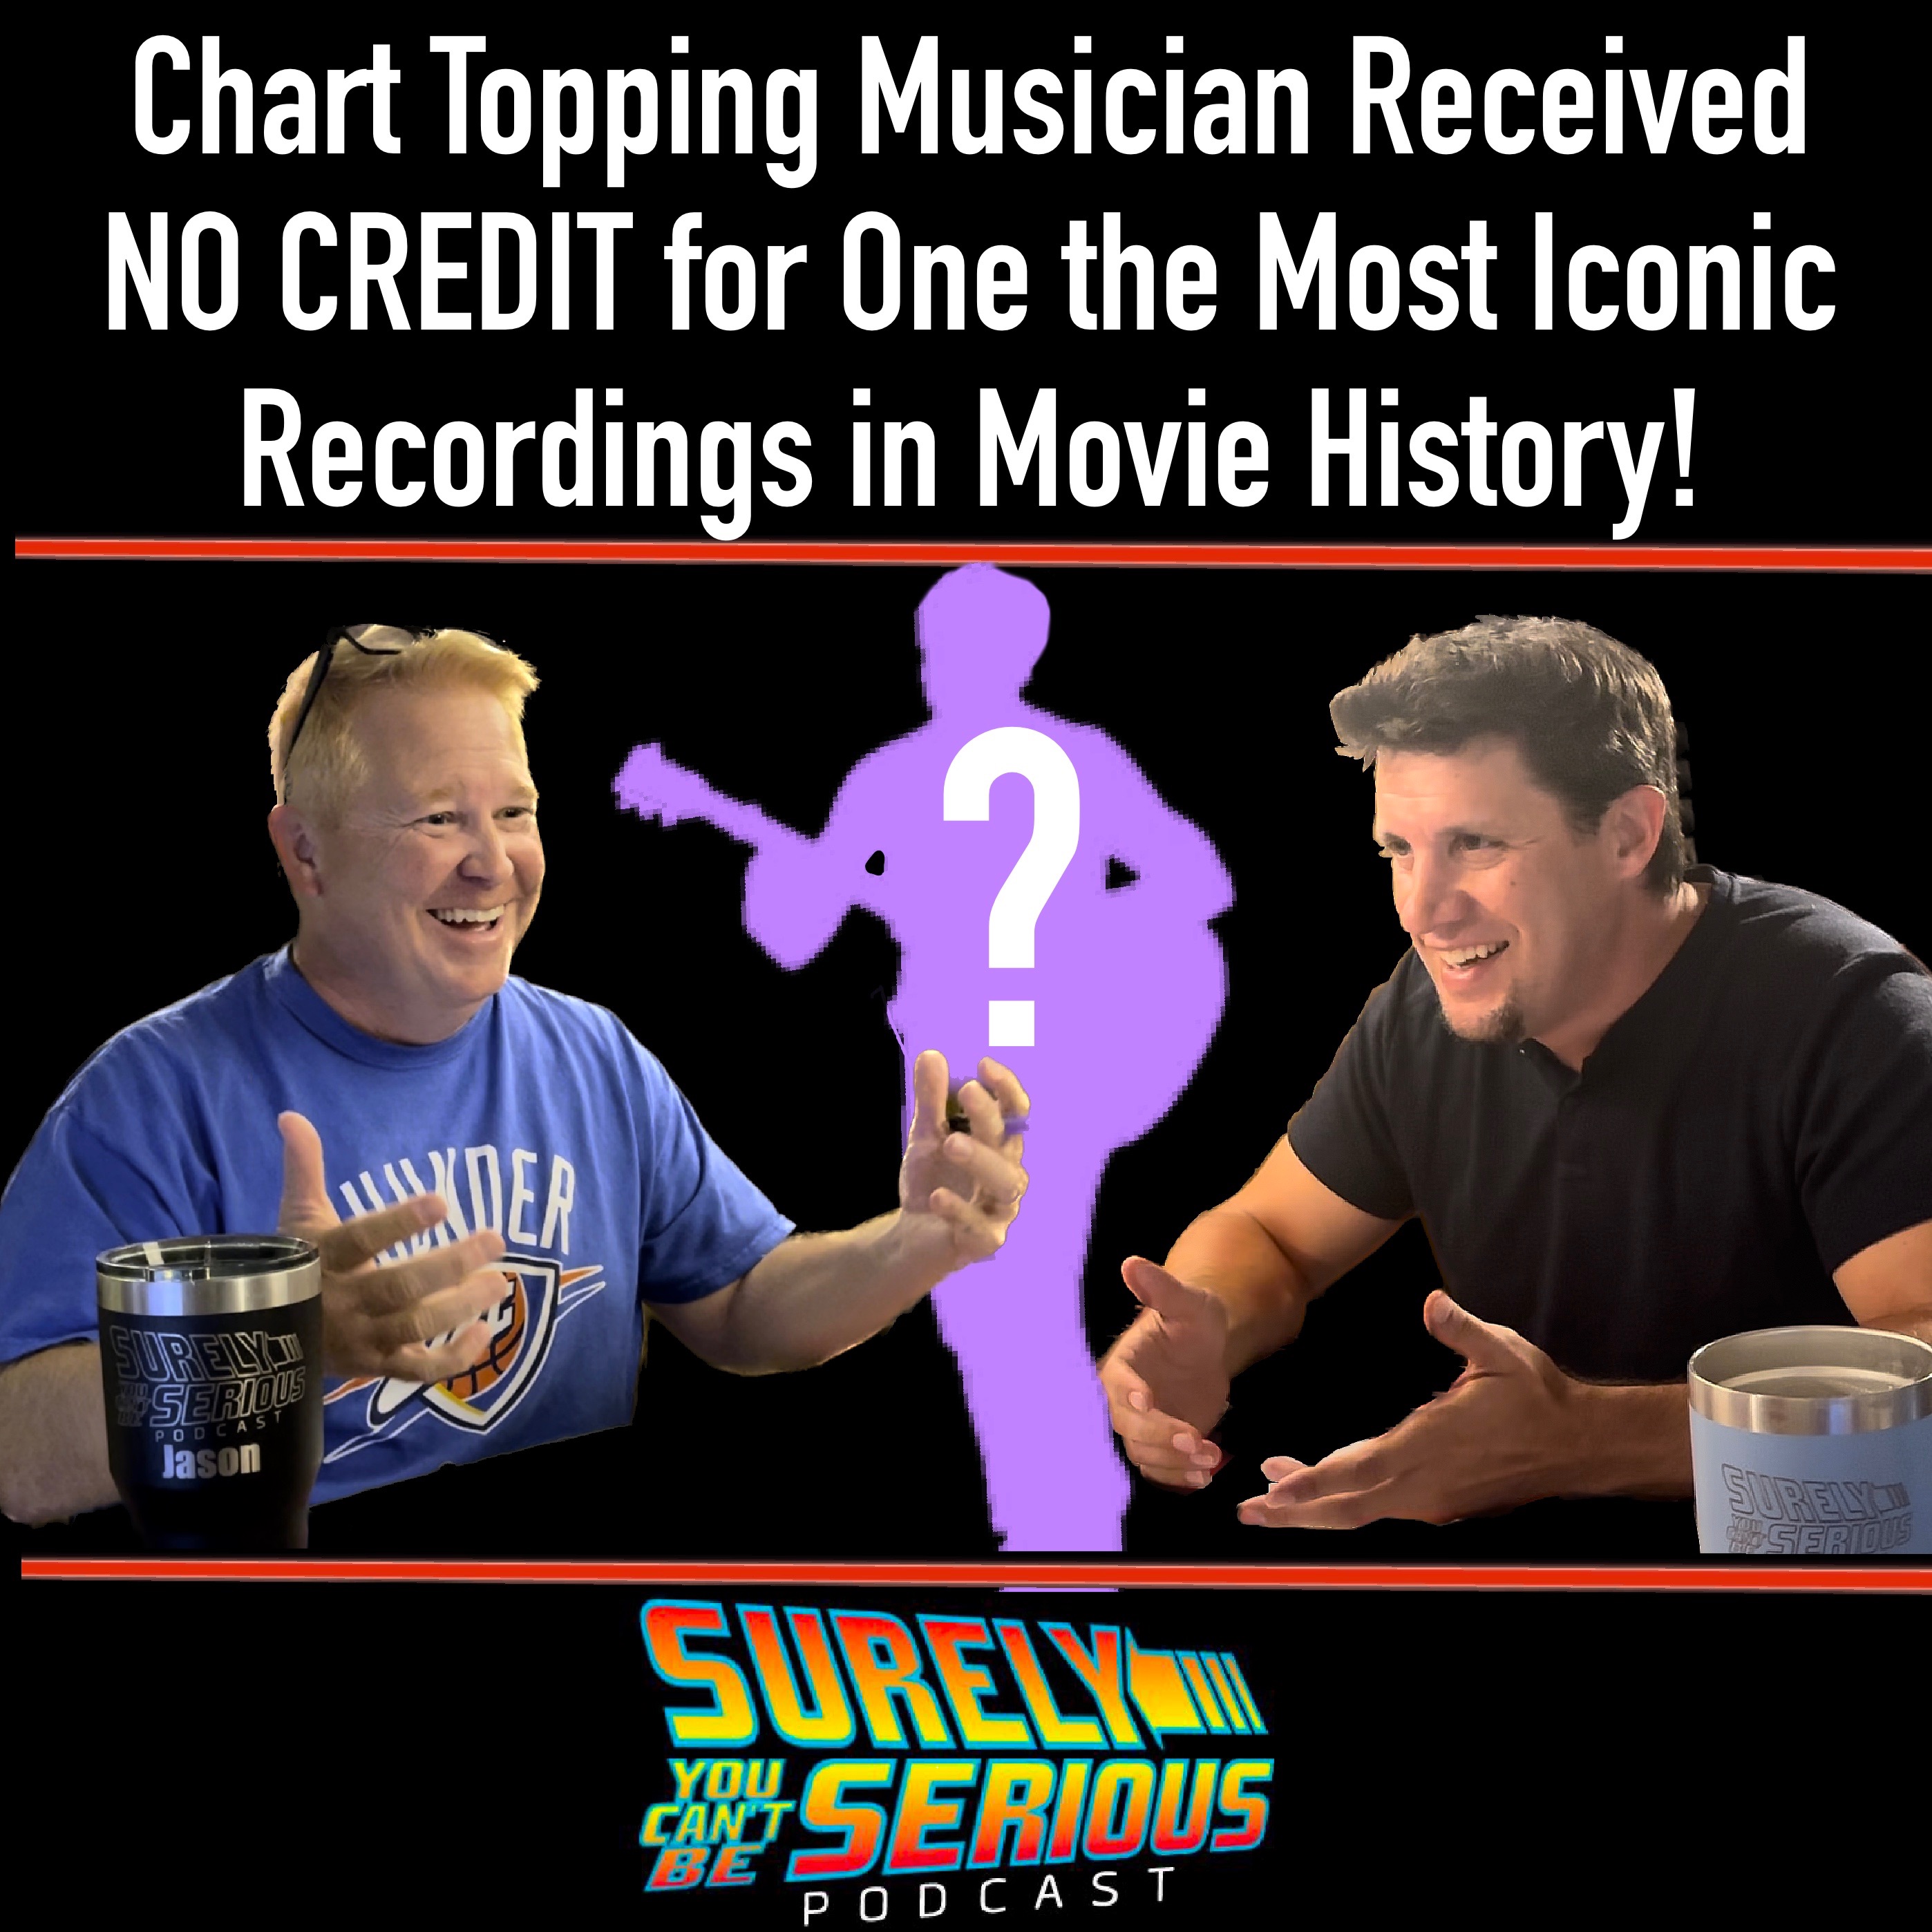 Chart Topping Musician Received NO CREDIT for One of the Most Iconic Recordings in Movie History!